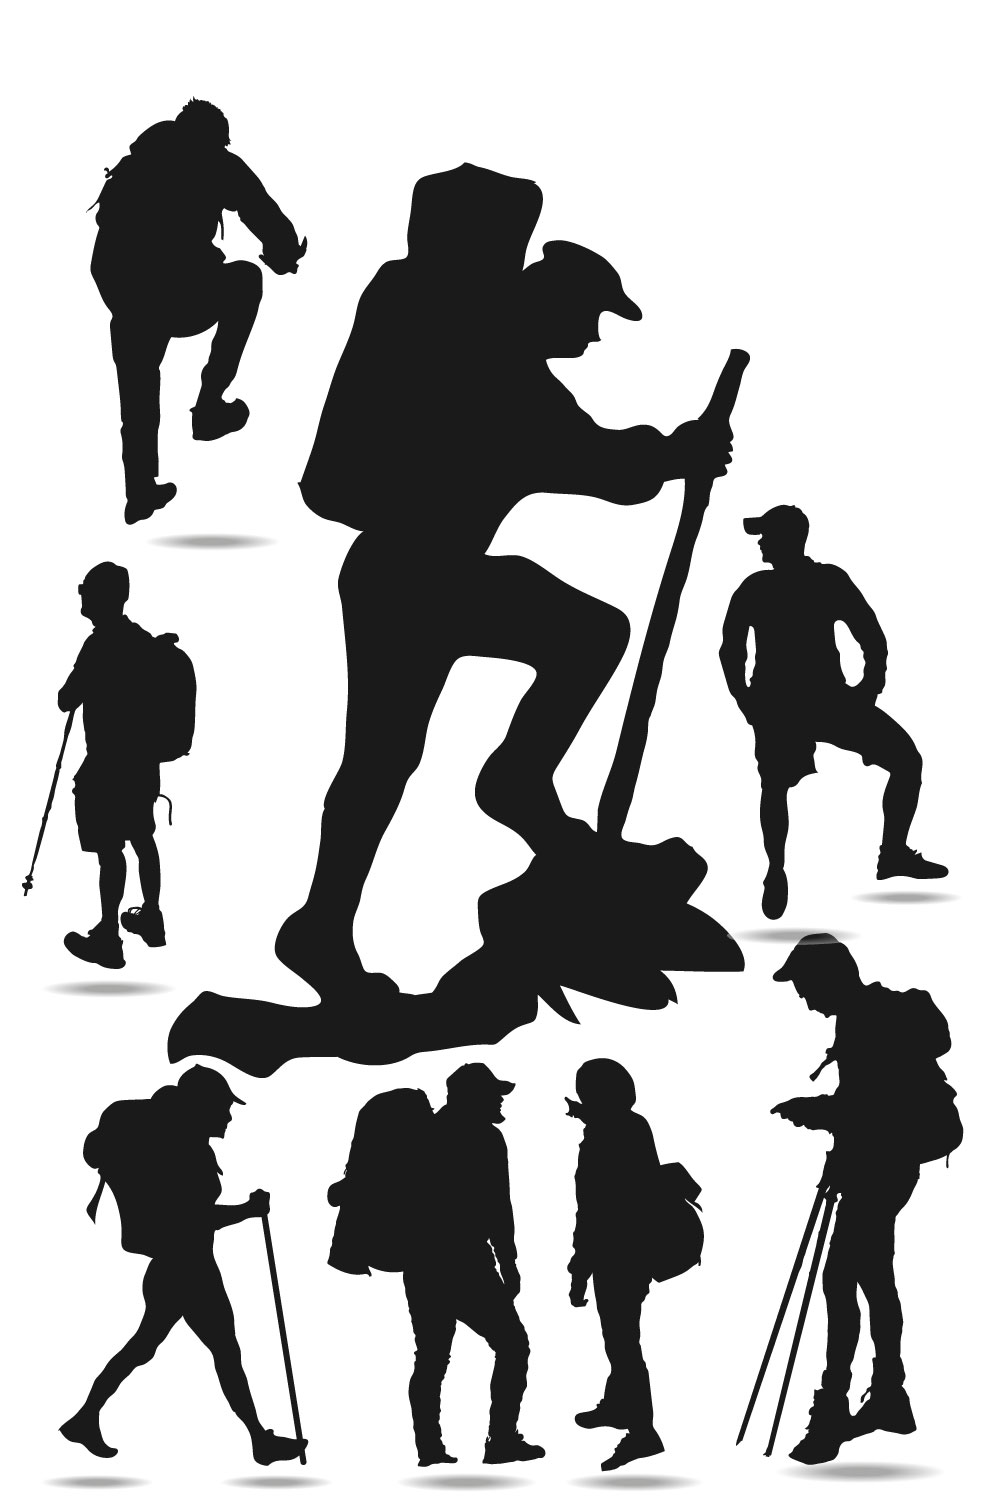 Climber hiker backpacker silhouette vector of a mountaineer pinterest preview image.